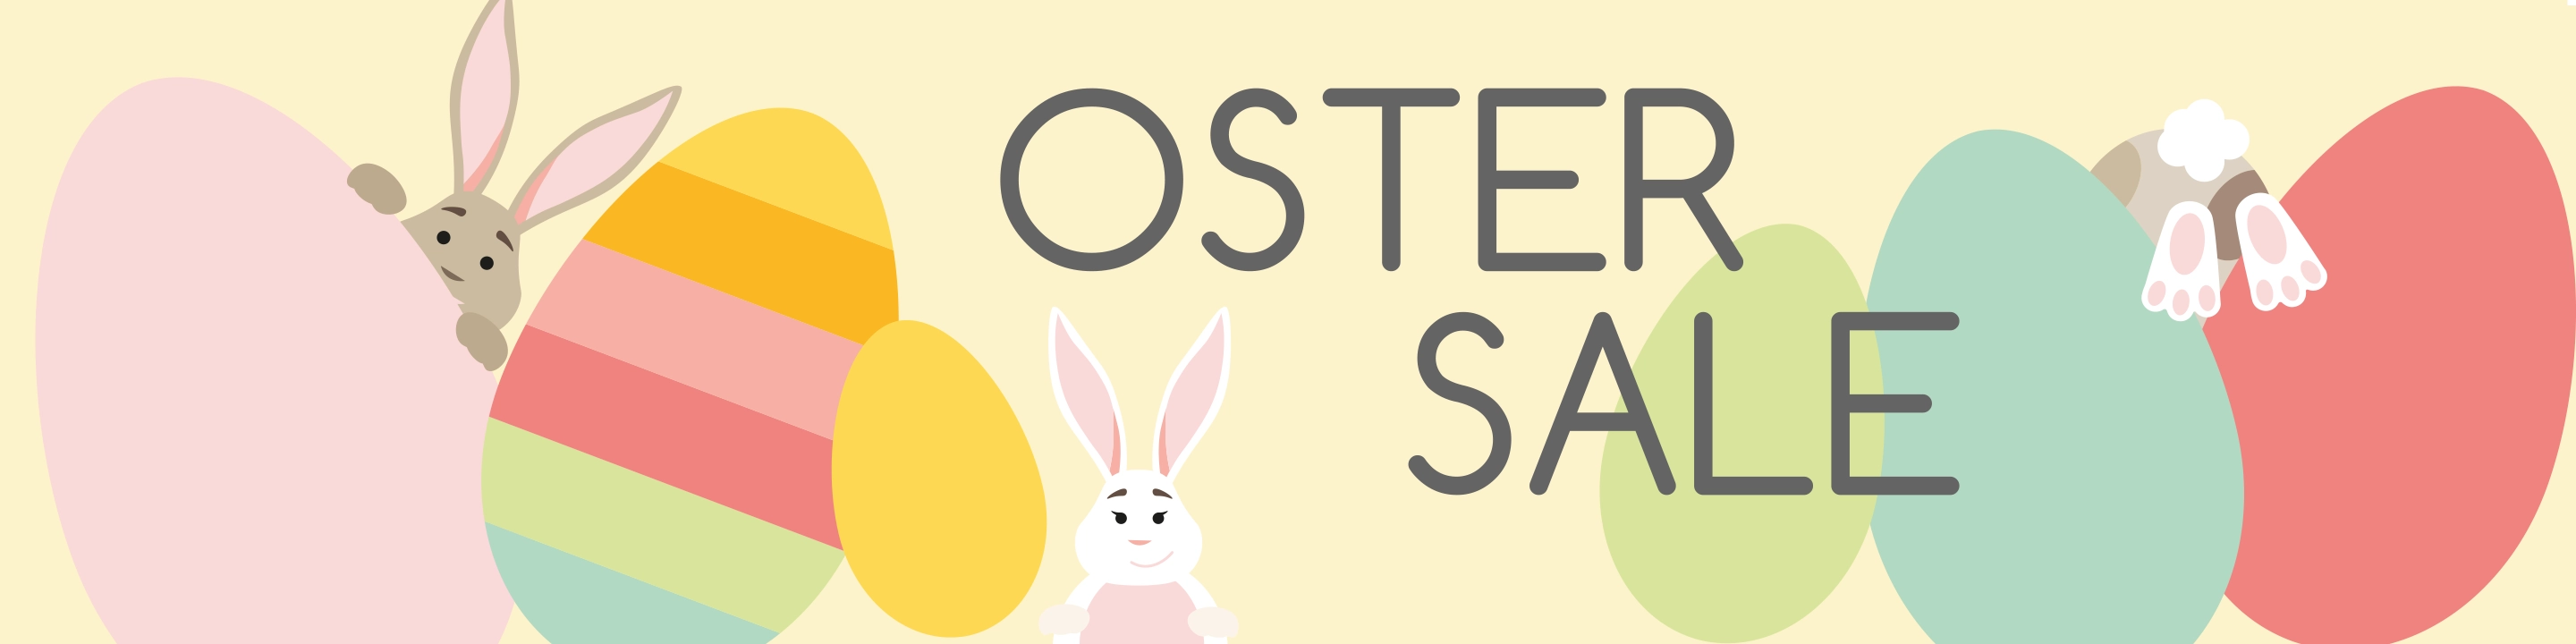 Ostersale_Banner